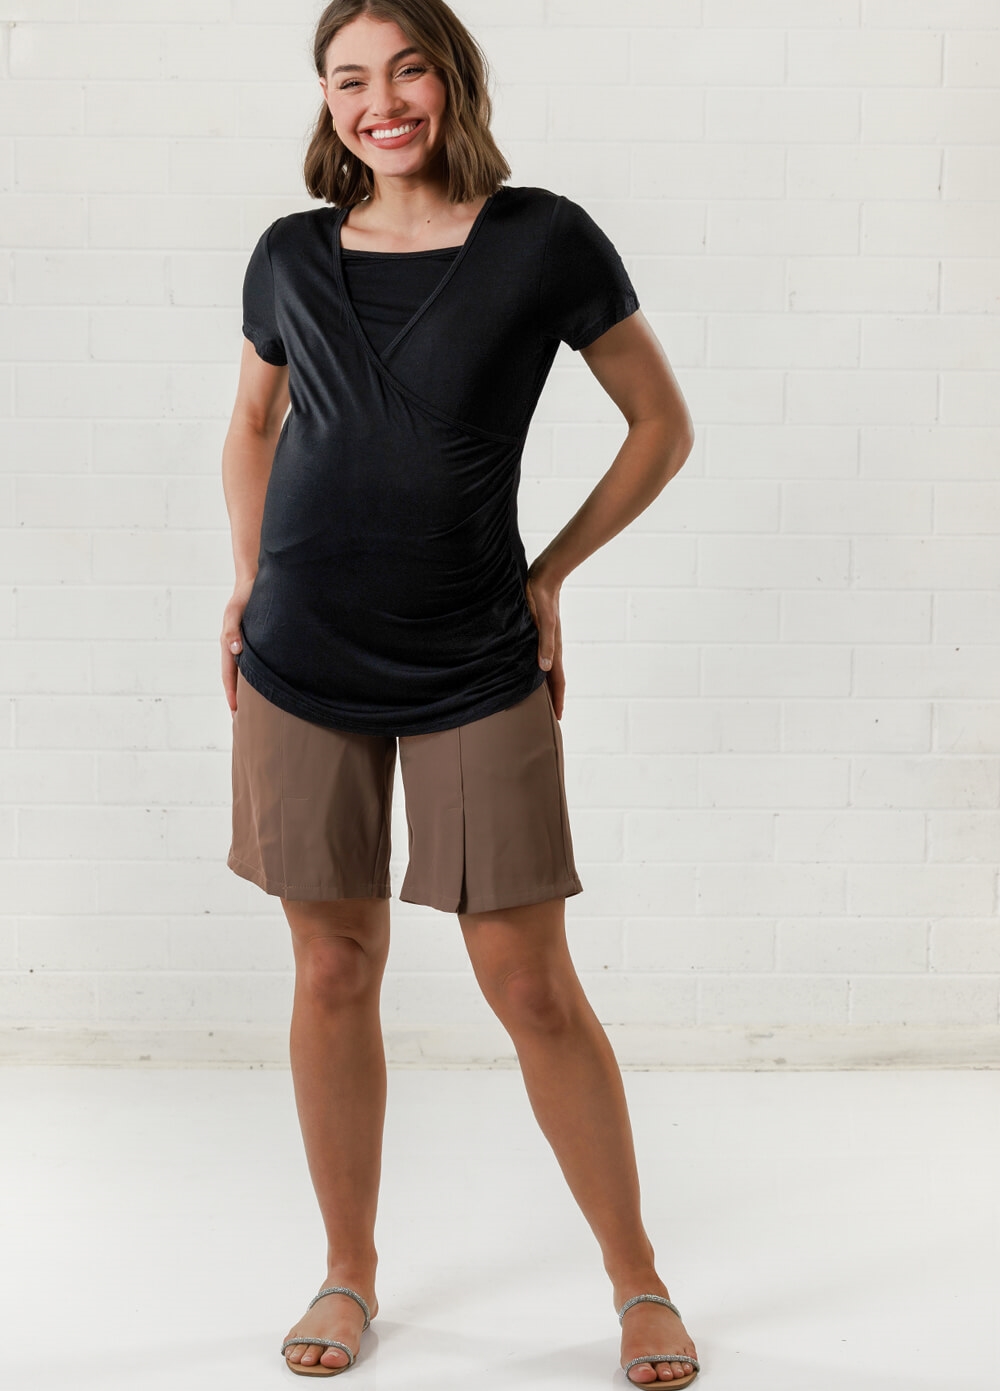 Lait & Co - Lunette Maternity Shorts in Taupe